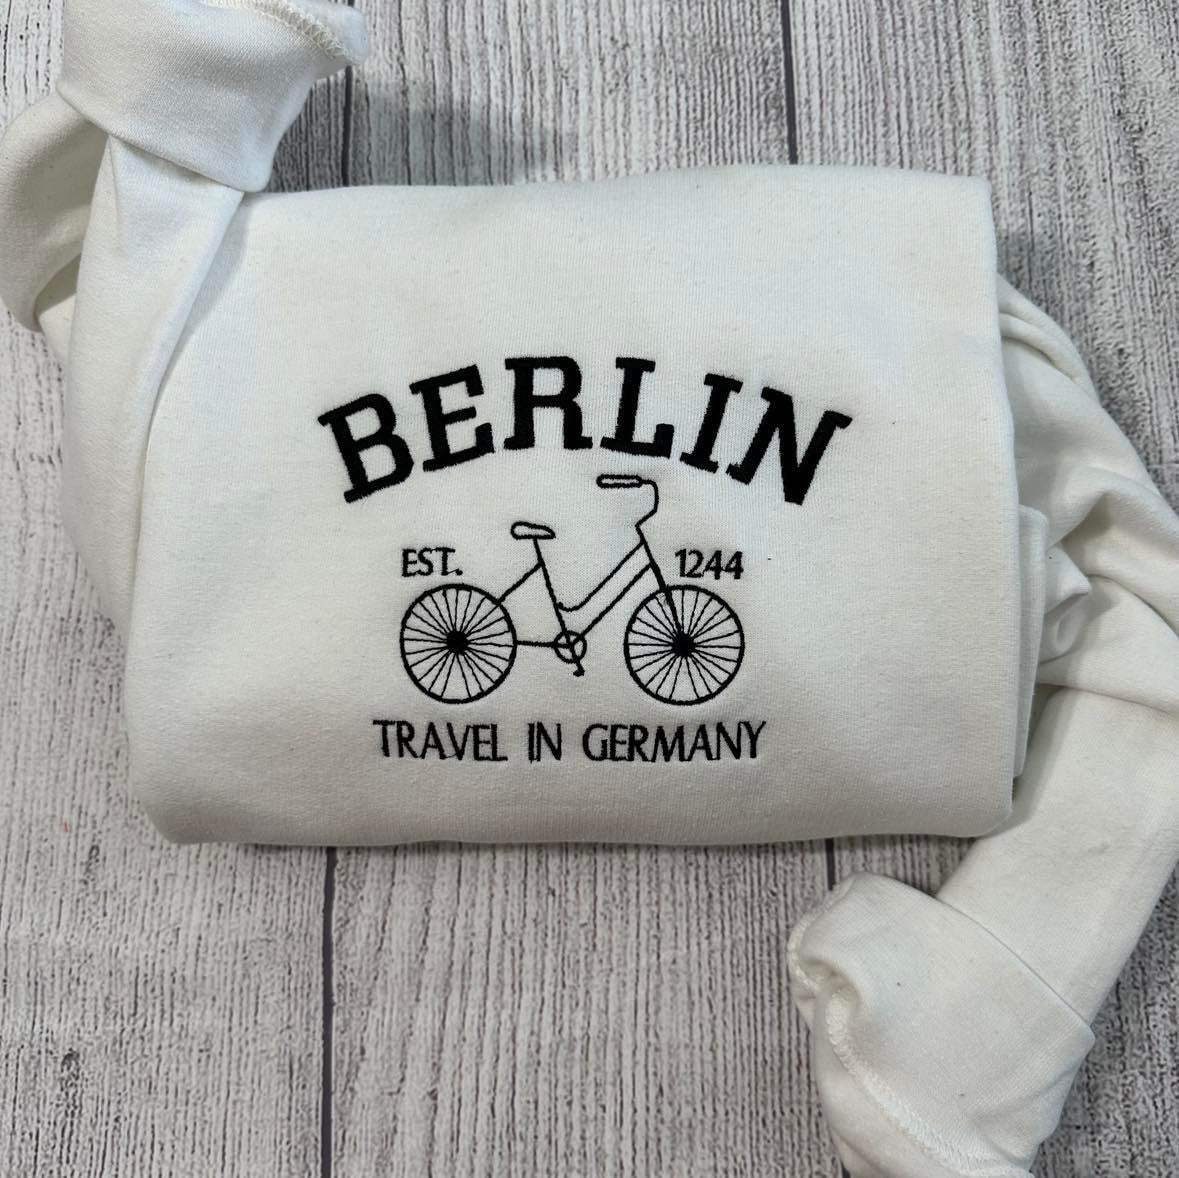 Berlin Germany embroidered sweatshirt; Travel In Germany gifts